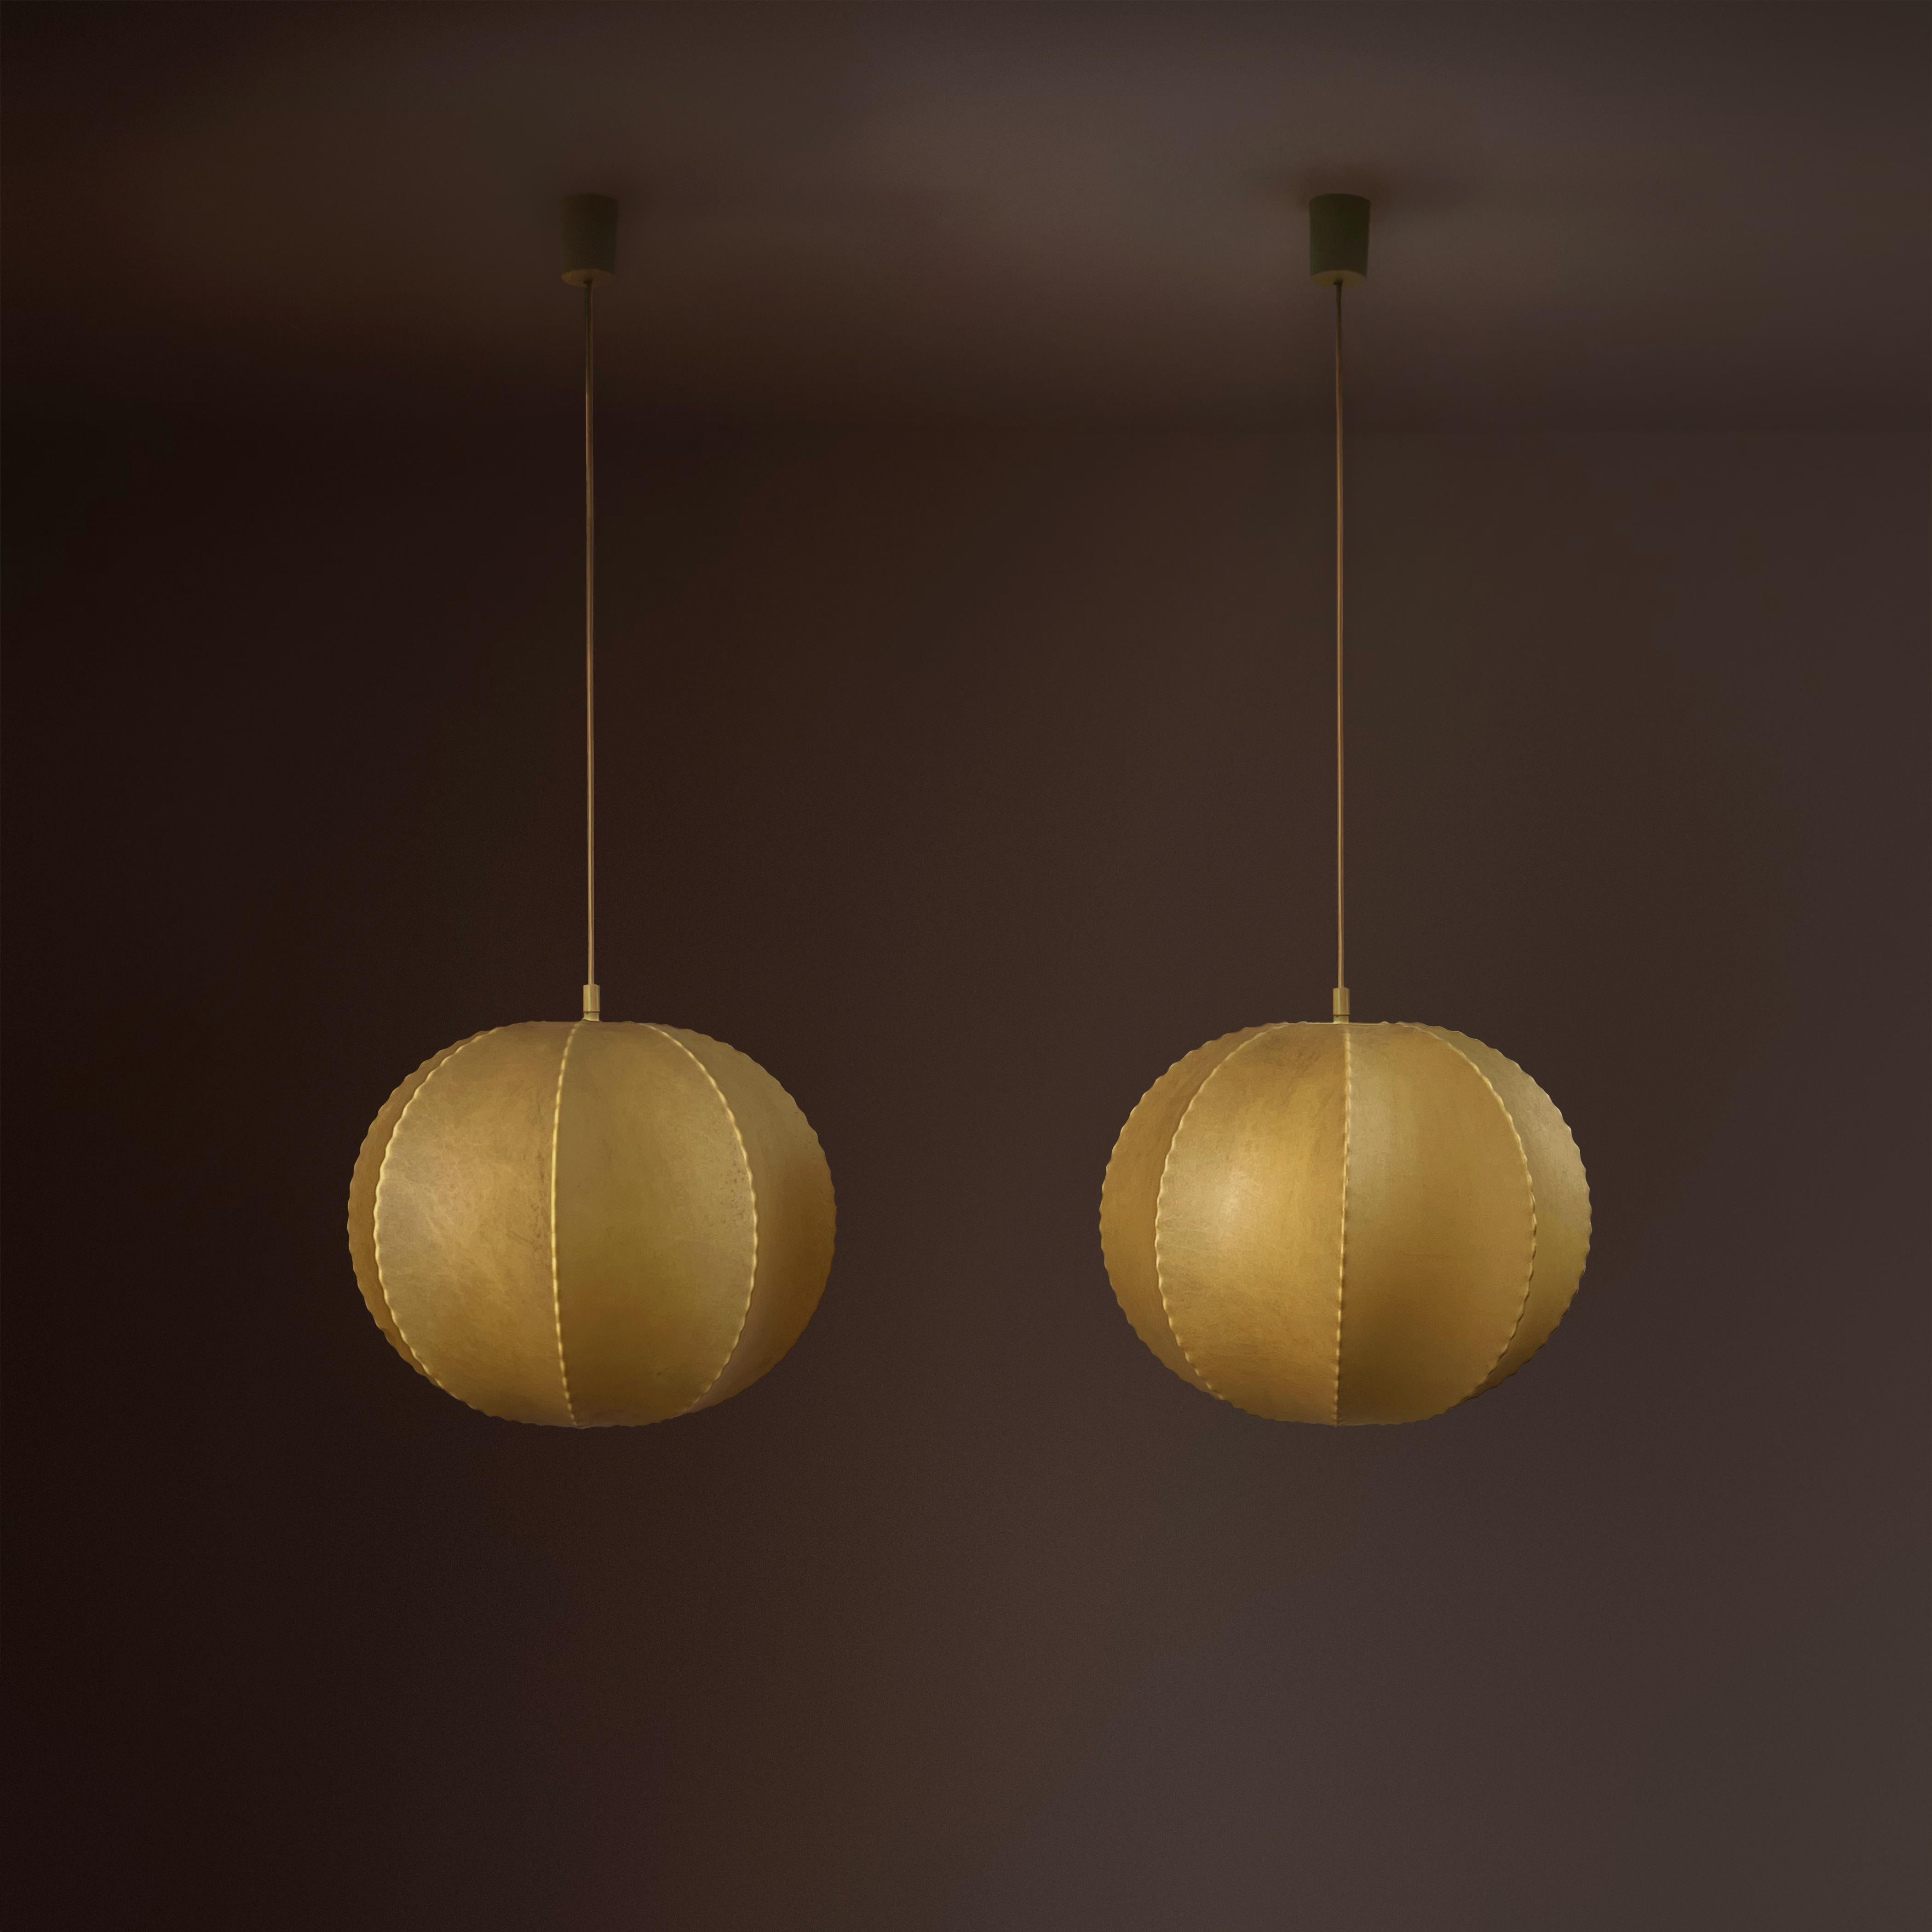 Among the various cocoon ceiling lamps in our collection, these two spherical ones, attributed to Friedel Wauer and manufactured in Germany, are truly exceptional. 

Measuring approximately 30cm in diameter each, they feature an internal wavy